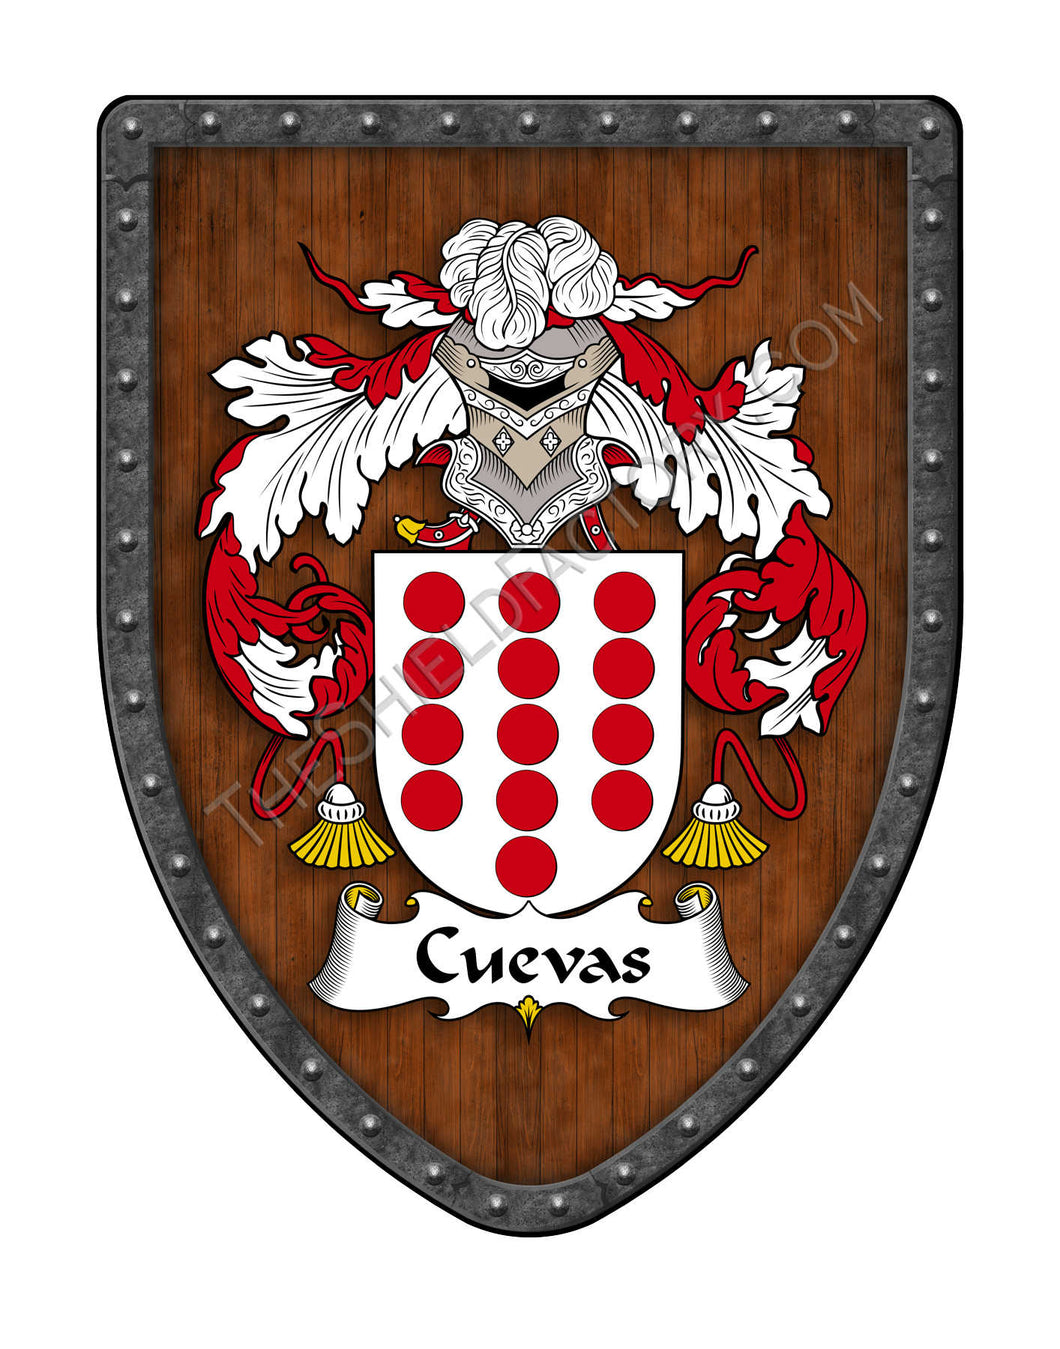 Cuevas Coat of Arms Shield Family Crest